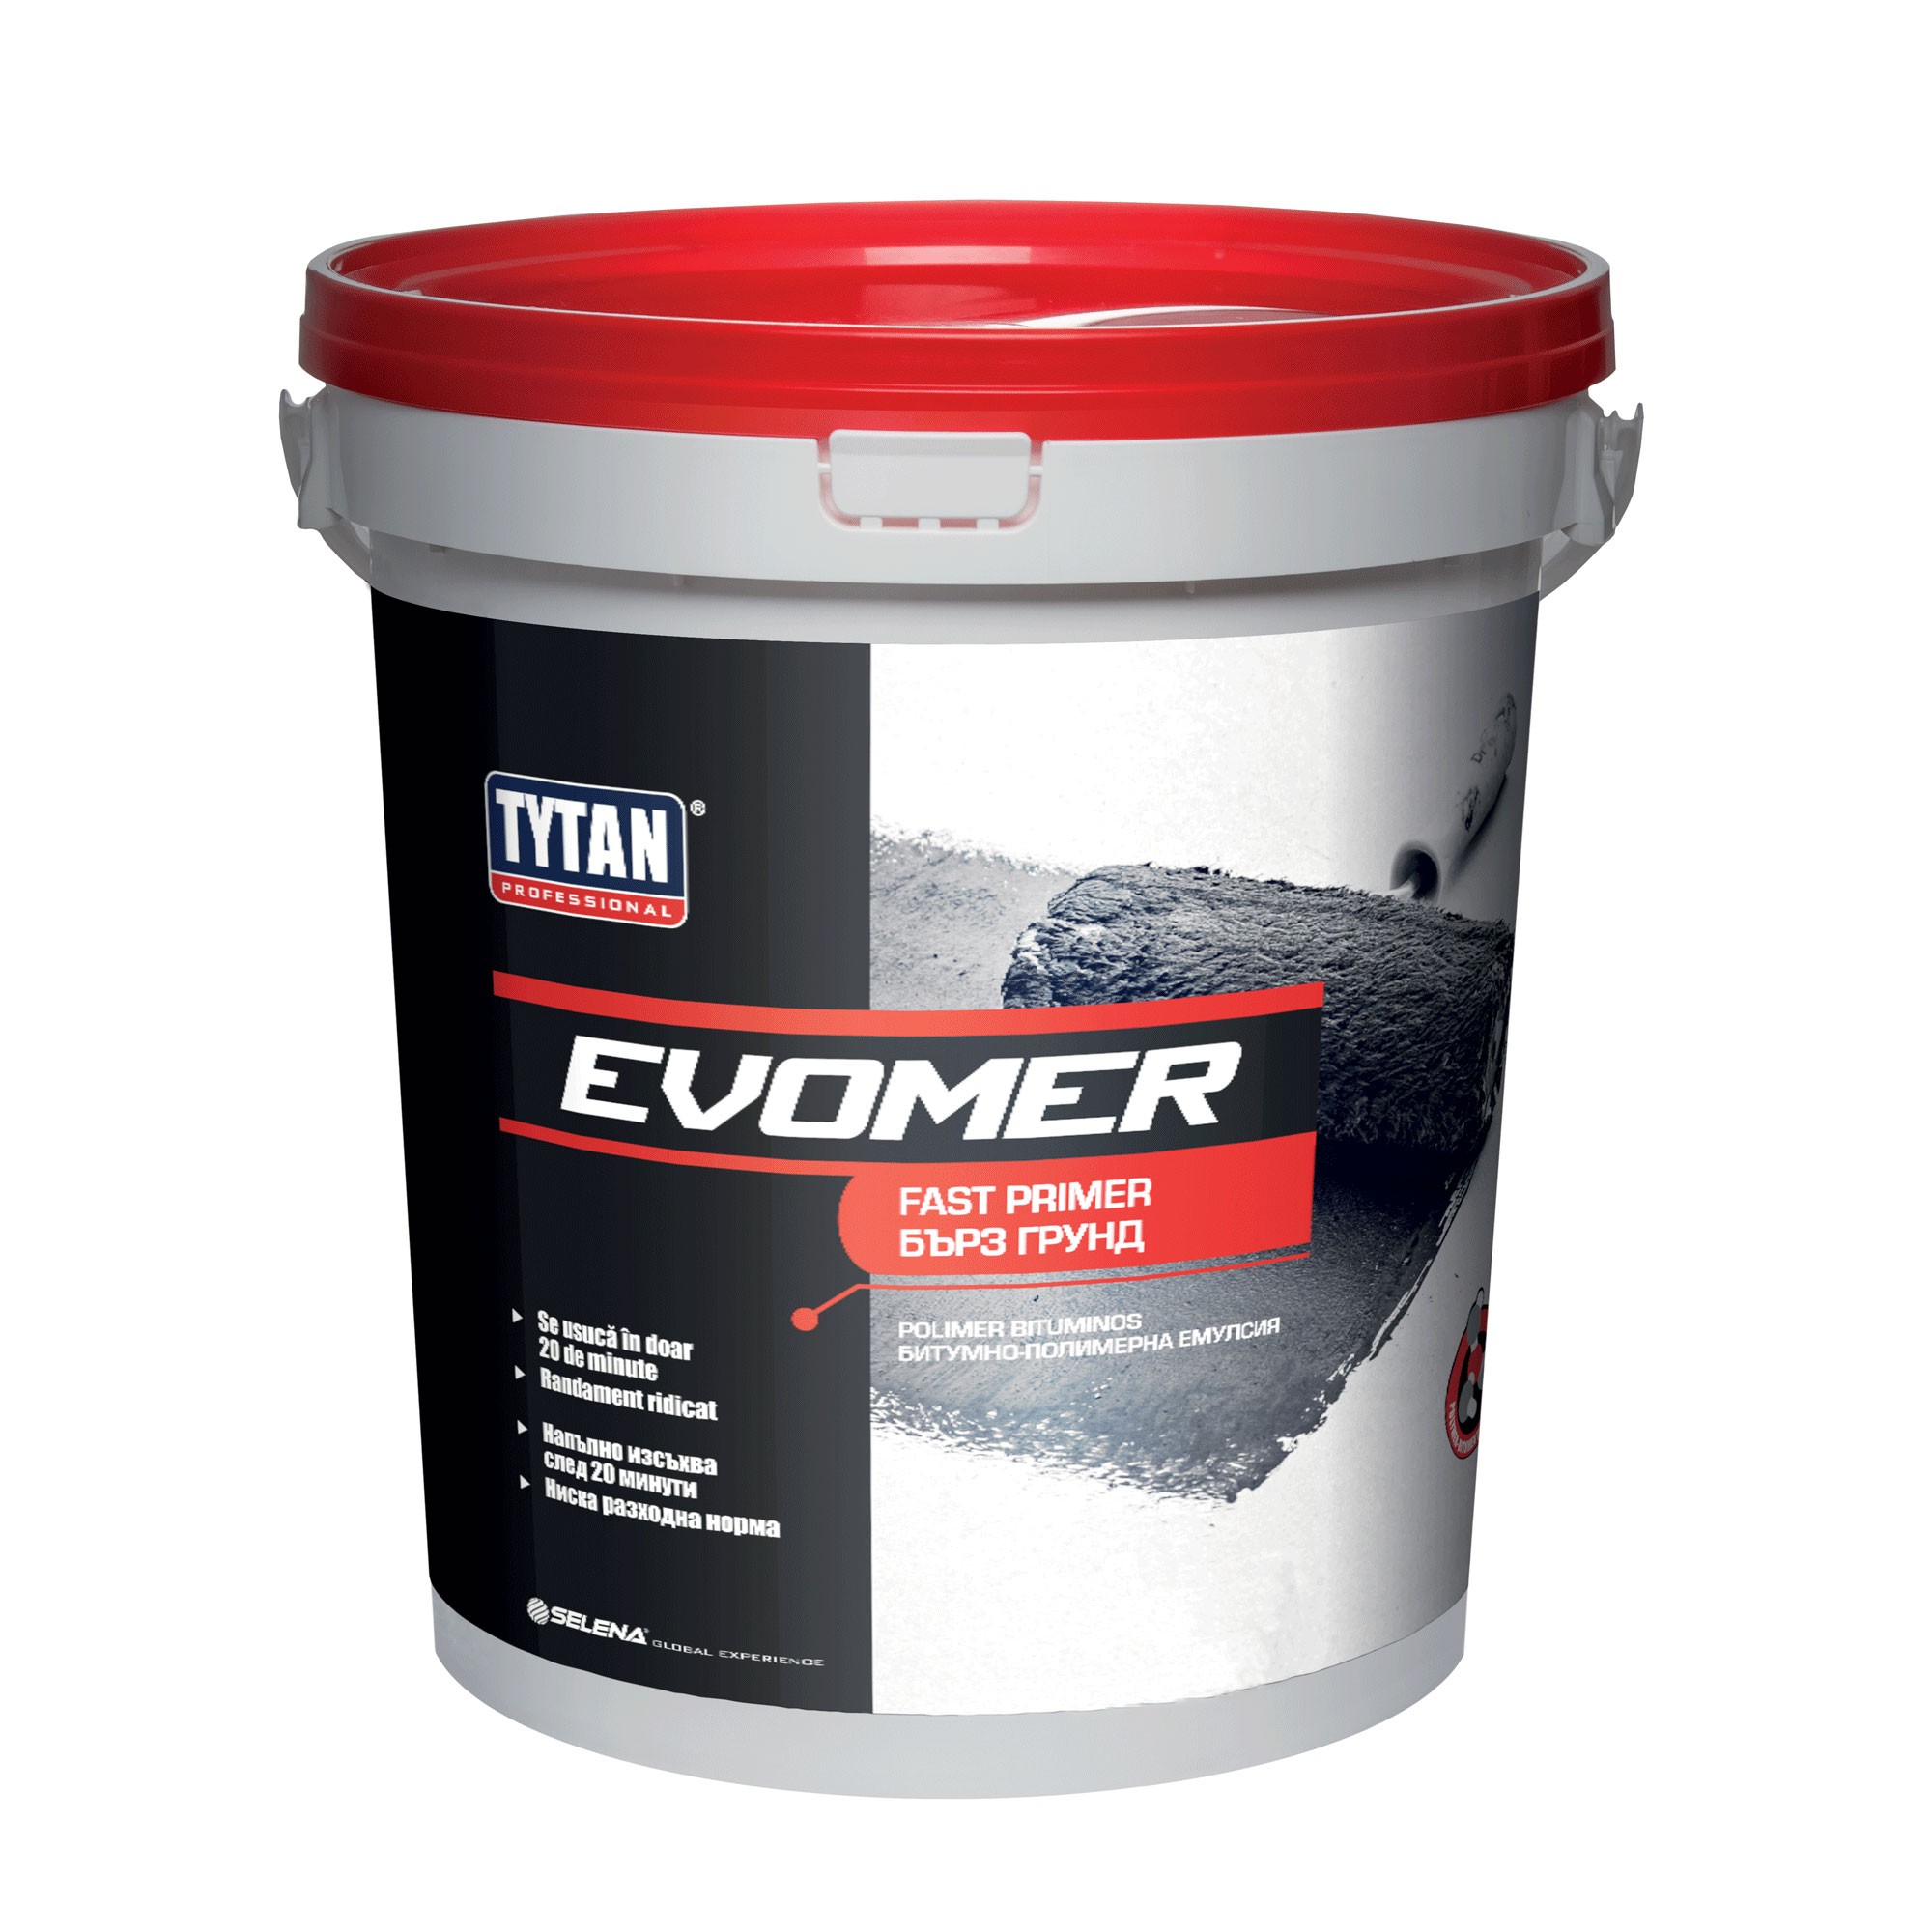 Products for waterproofing and sealing - Quick primer for waterproofing roof Evomer Fast Primer Tytan Professional 9kg, https:maxbau.ro